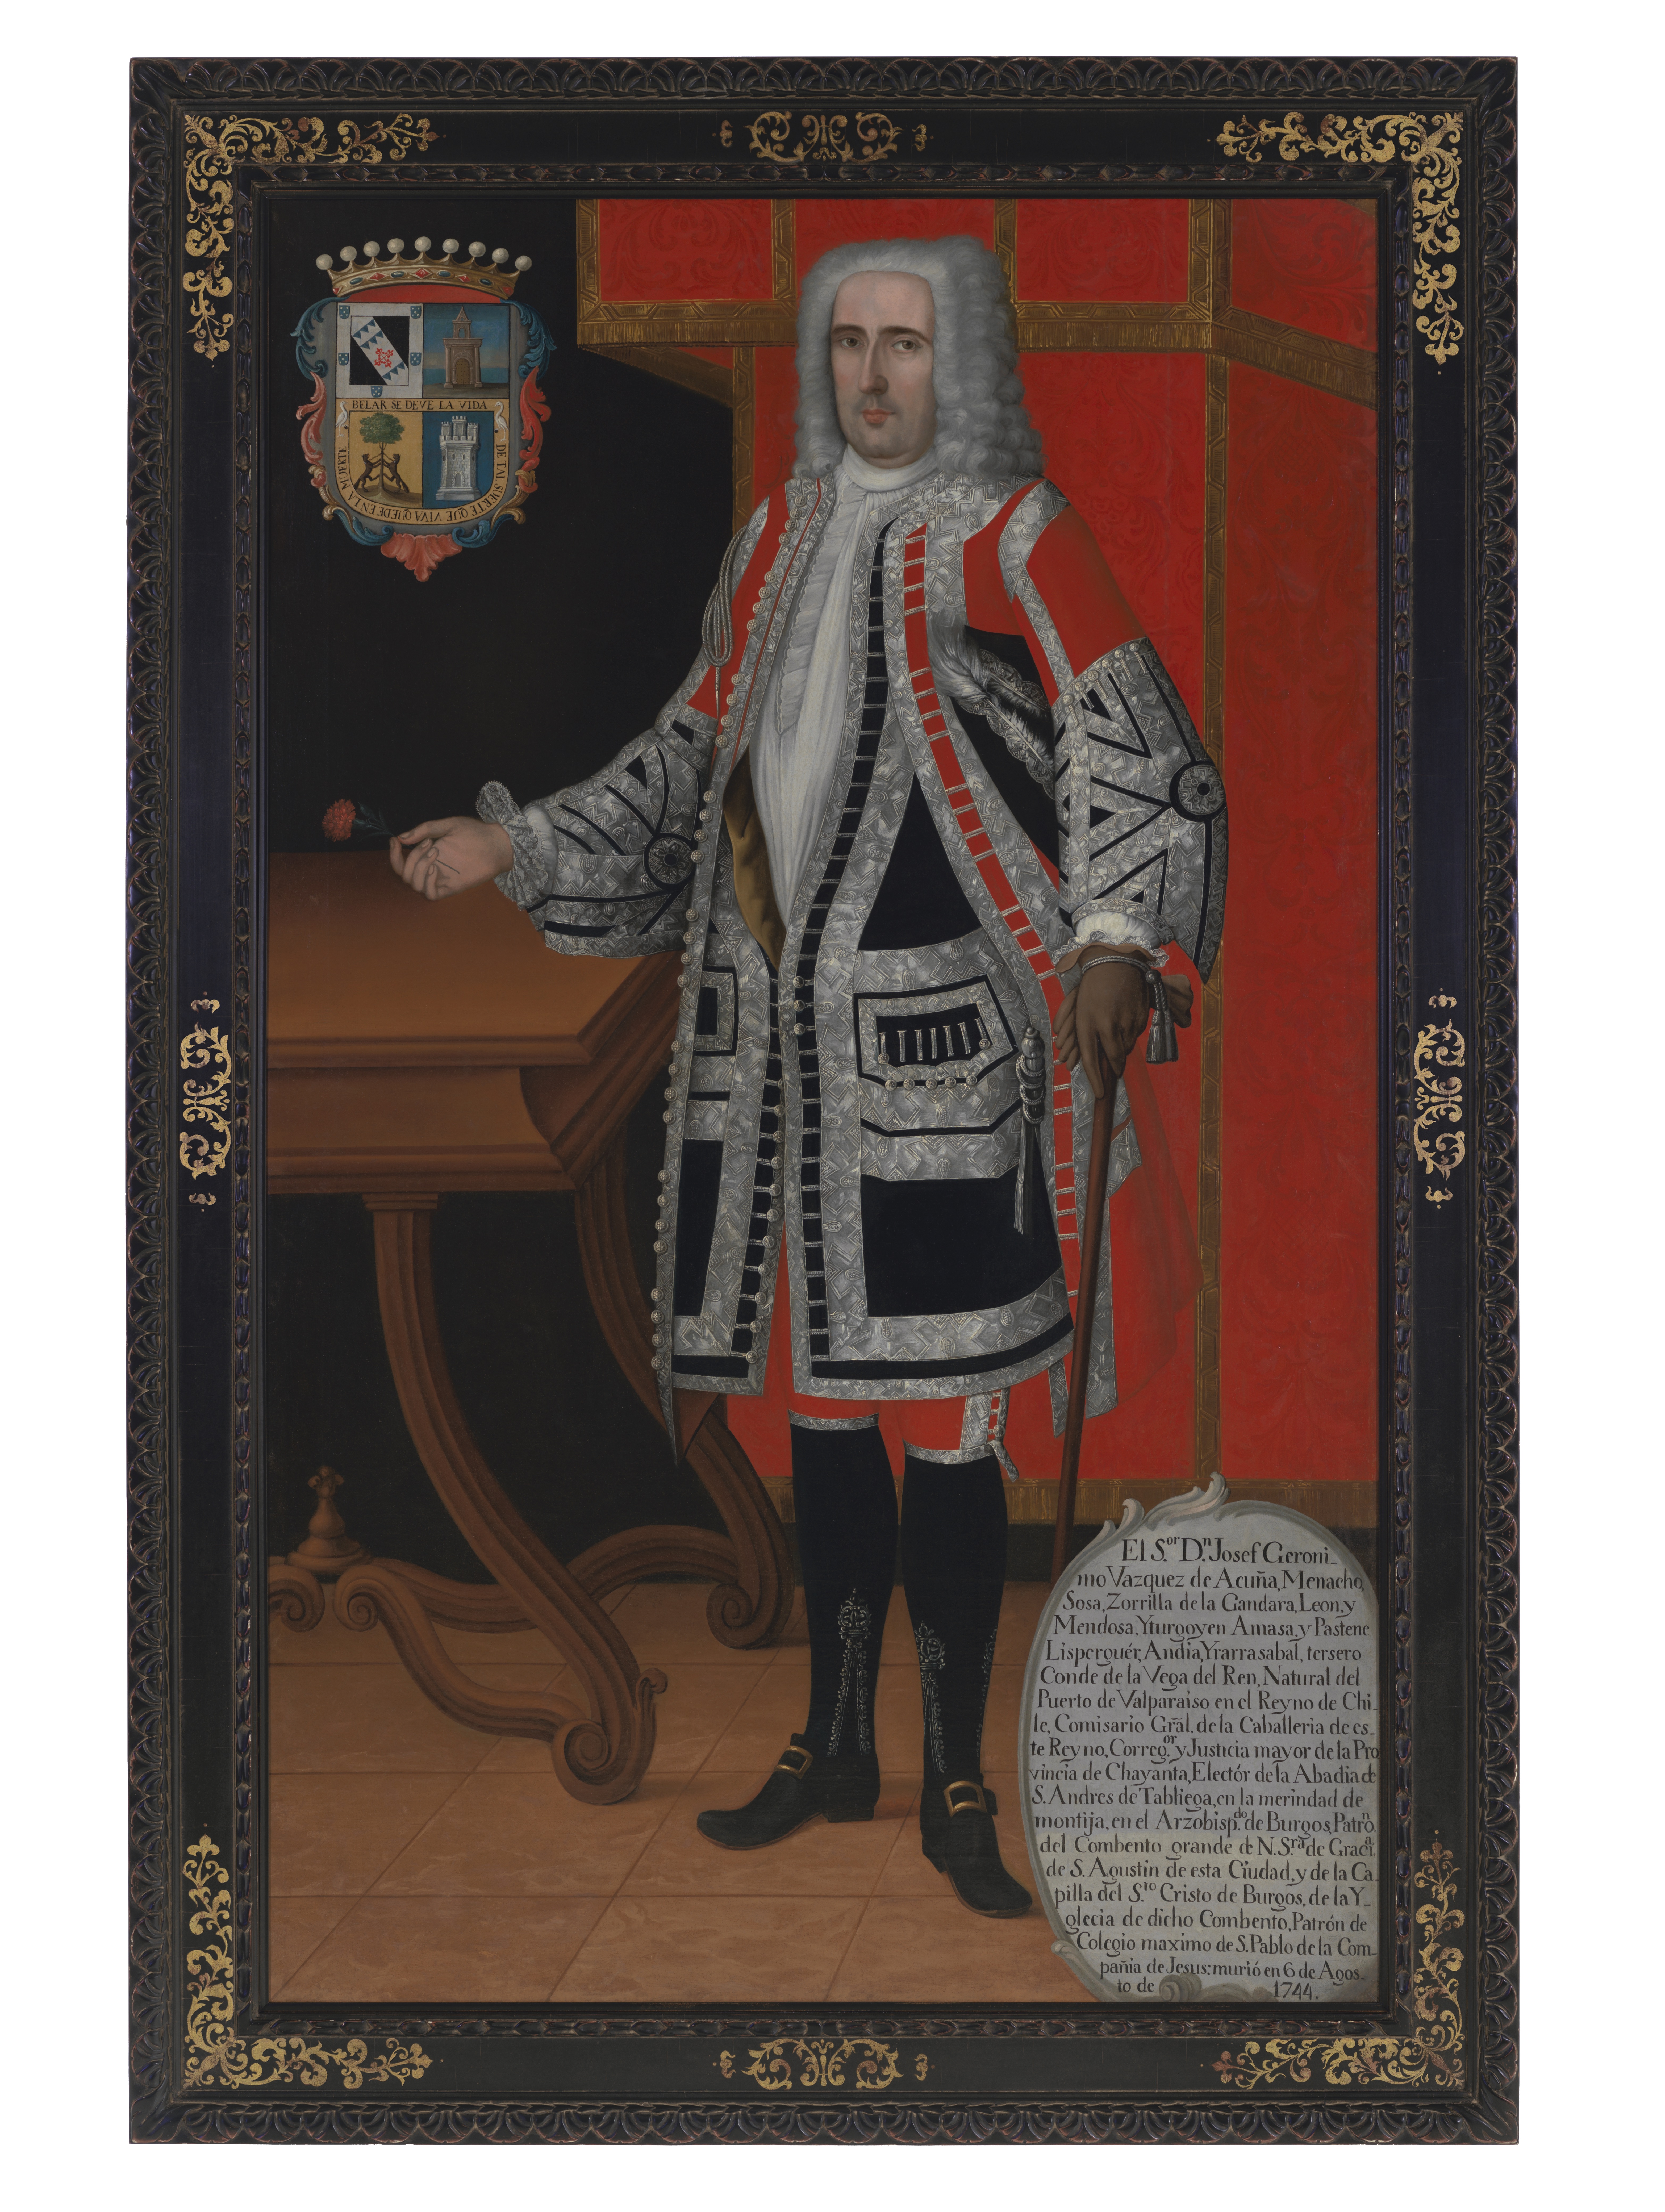 A painting depicting a man in an opulent set of clothes standing at a table with a red drape behind him. His coat of arms is in the top left corner while a cartouche of his biography is at the bottom right.